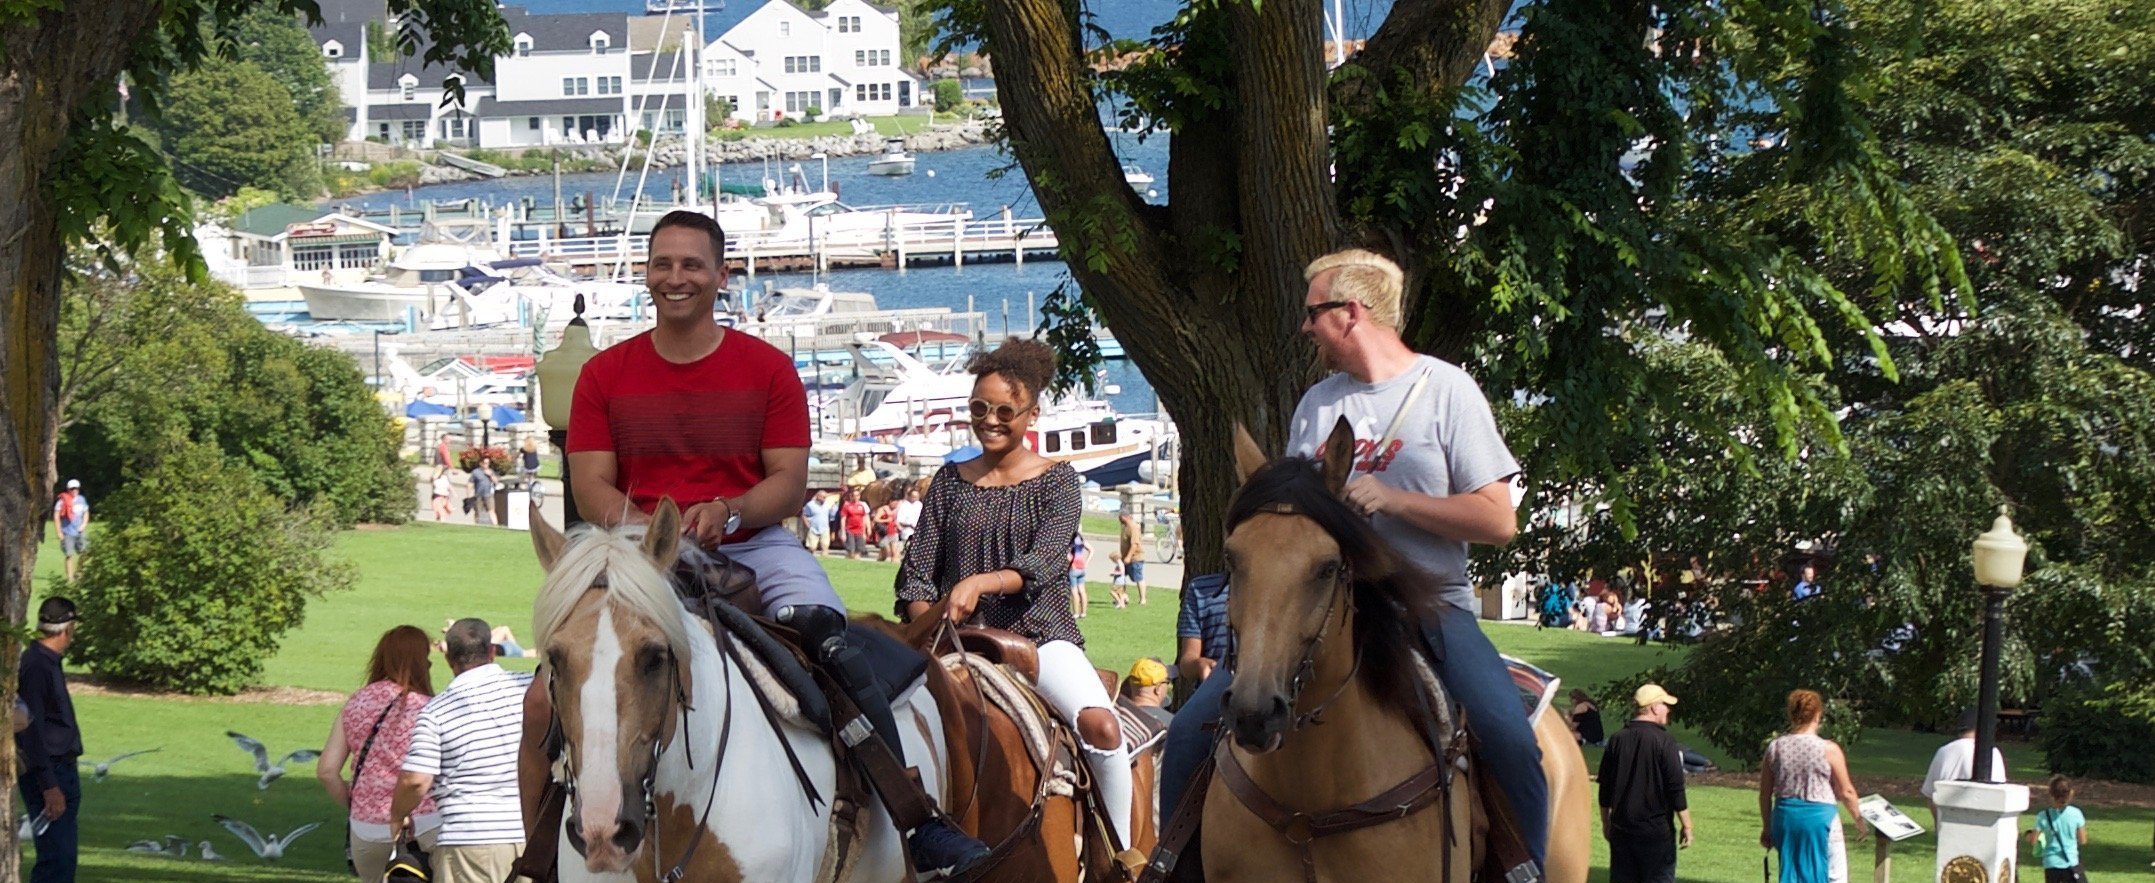 Summer weather on Mackinac Island is perfect for all kinds of activities, from swimming to hiking to horseback riding.